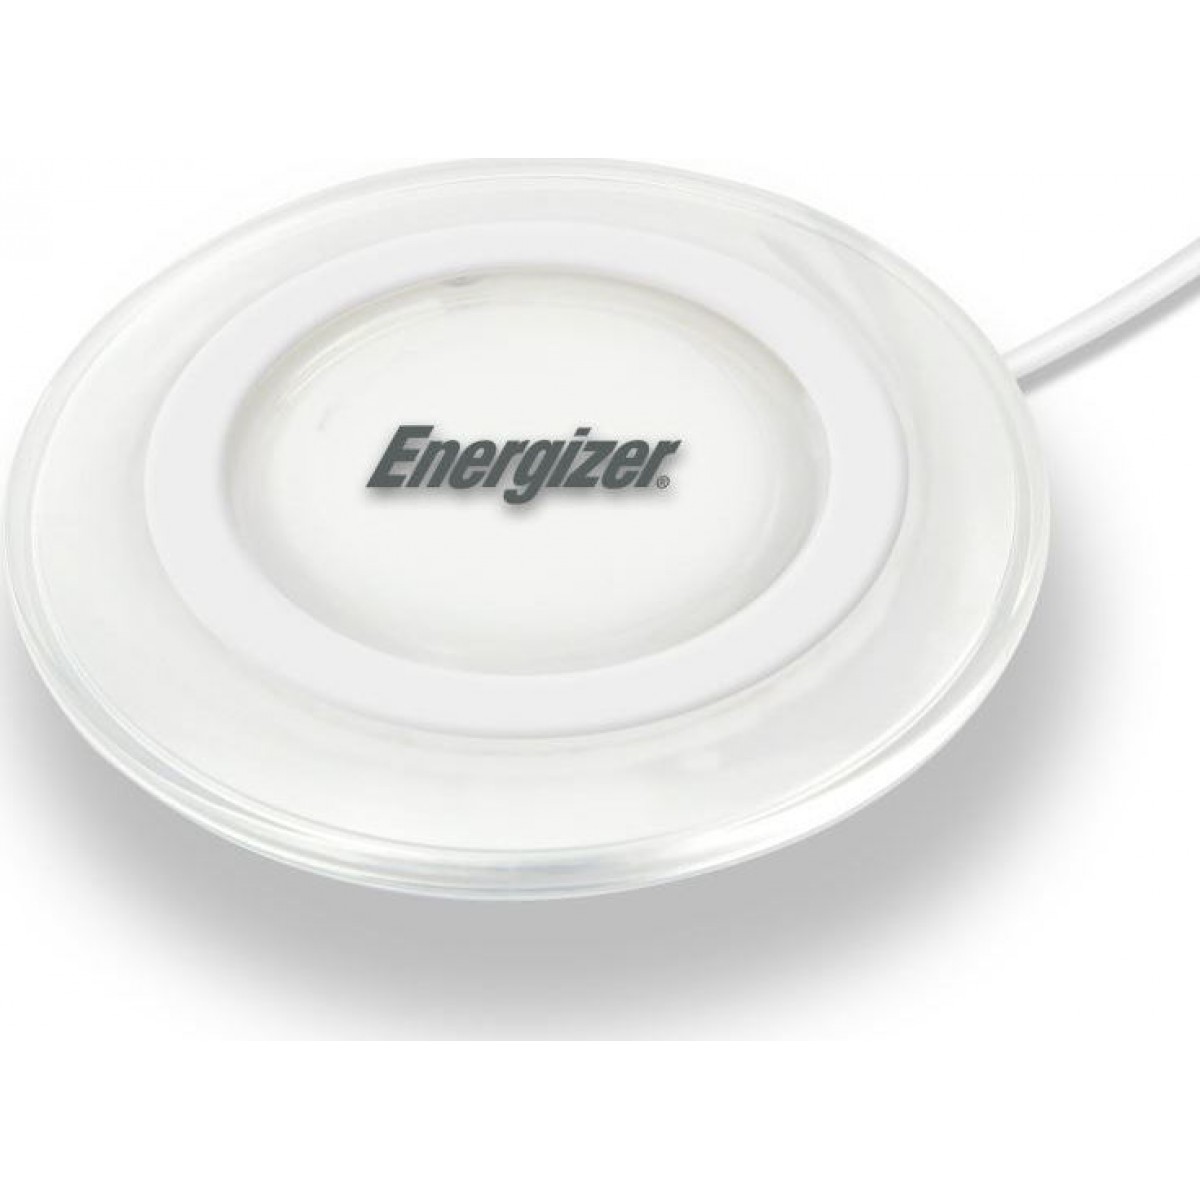 Energizer Wireless Charging Pad 5W and Micro Usb Cable White